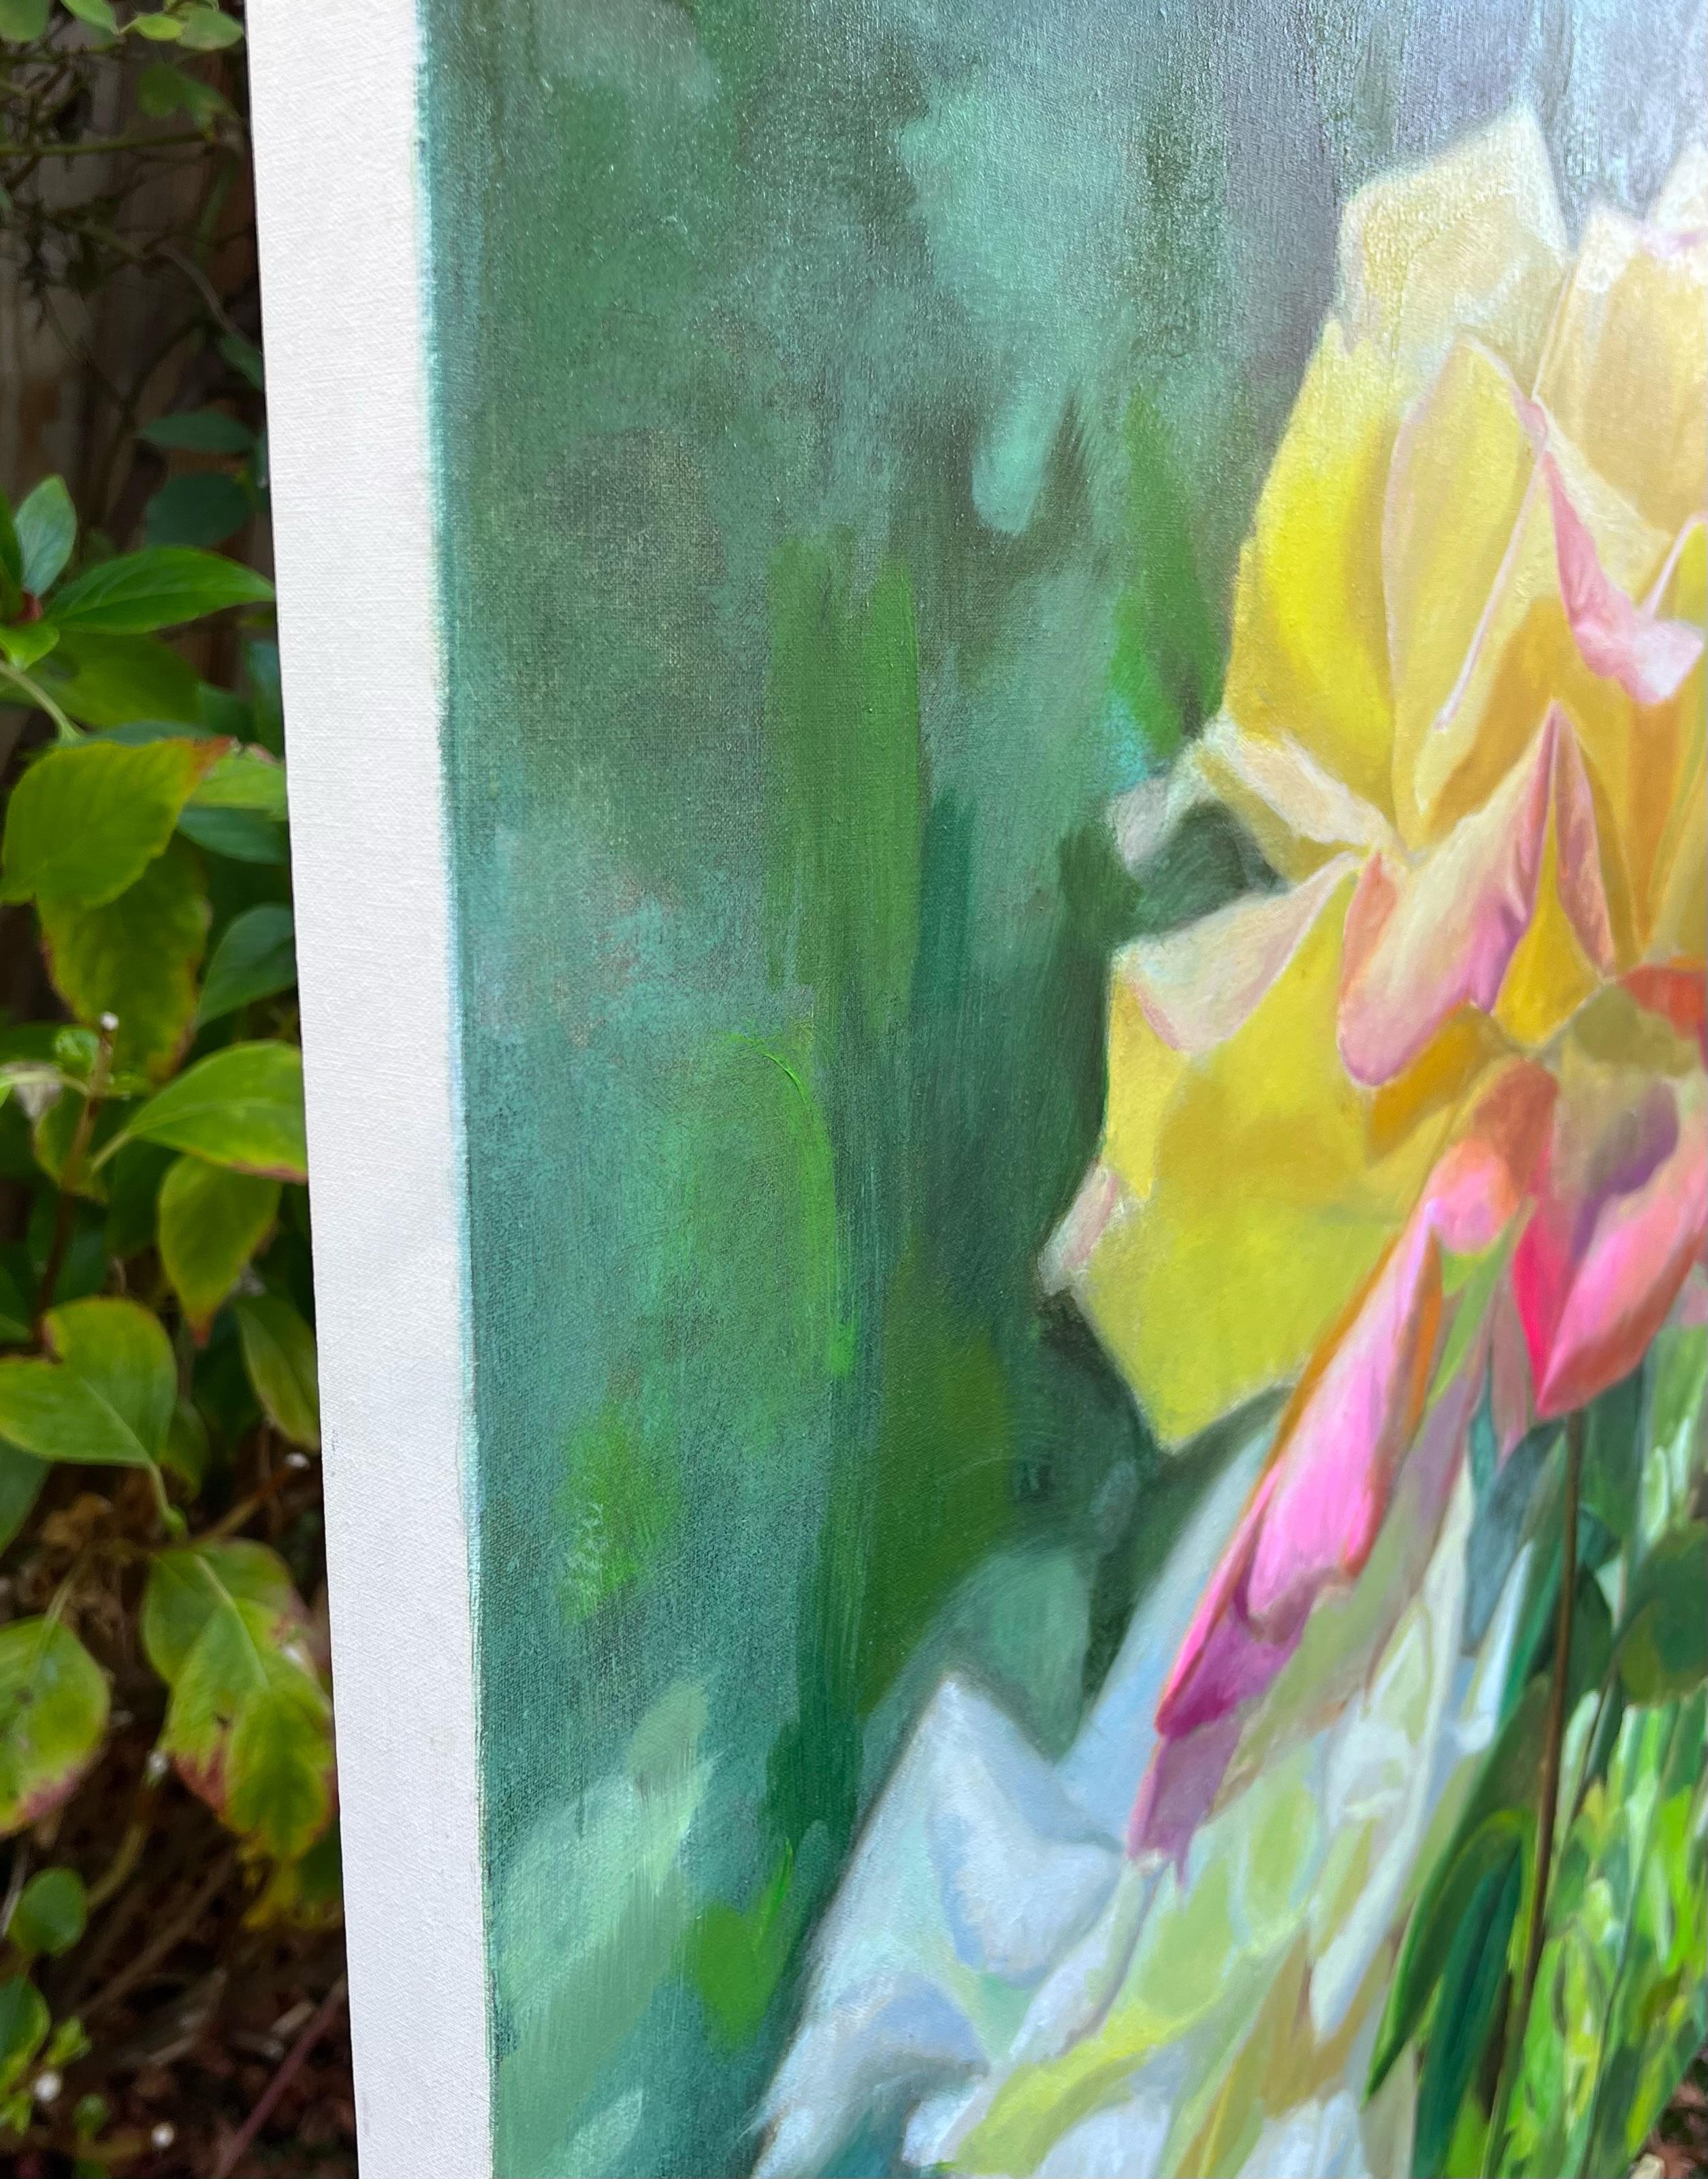 <p>Artist Comments<br>The painting shows a delicate yellow rose with pink flushes on the petal edges and a white flower gracefully blooming in the background. The surrounding green foliage adds a touch of natural beauty to the piece. Artist Hilary